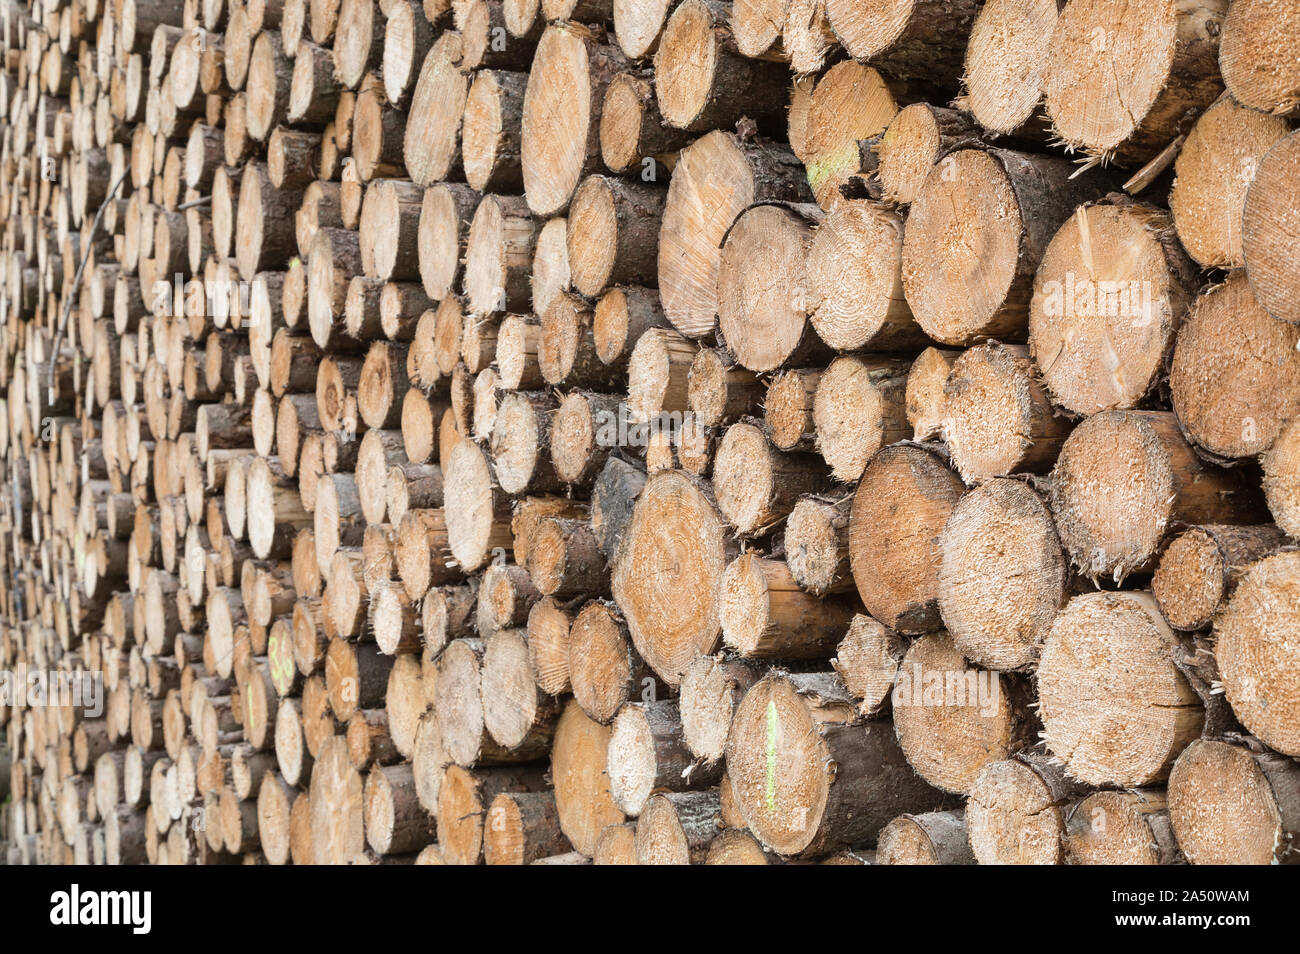 texture of stacked tree trunks Stock Photo